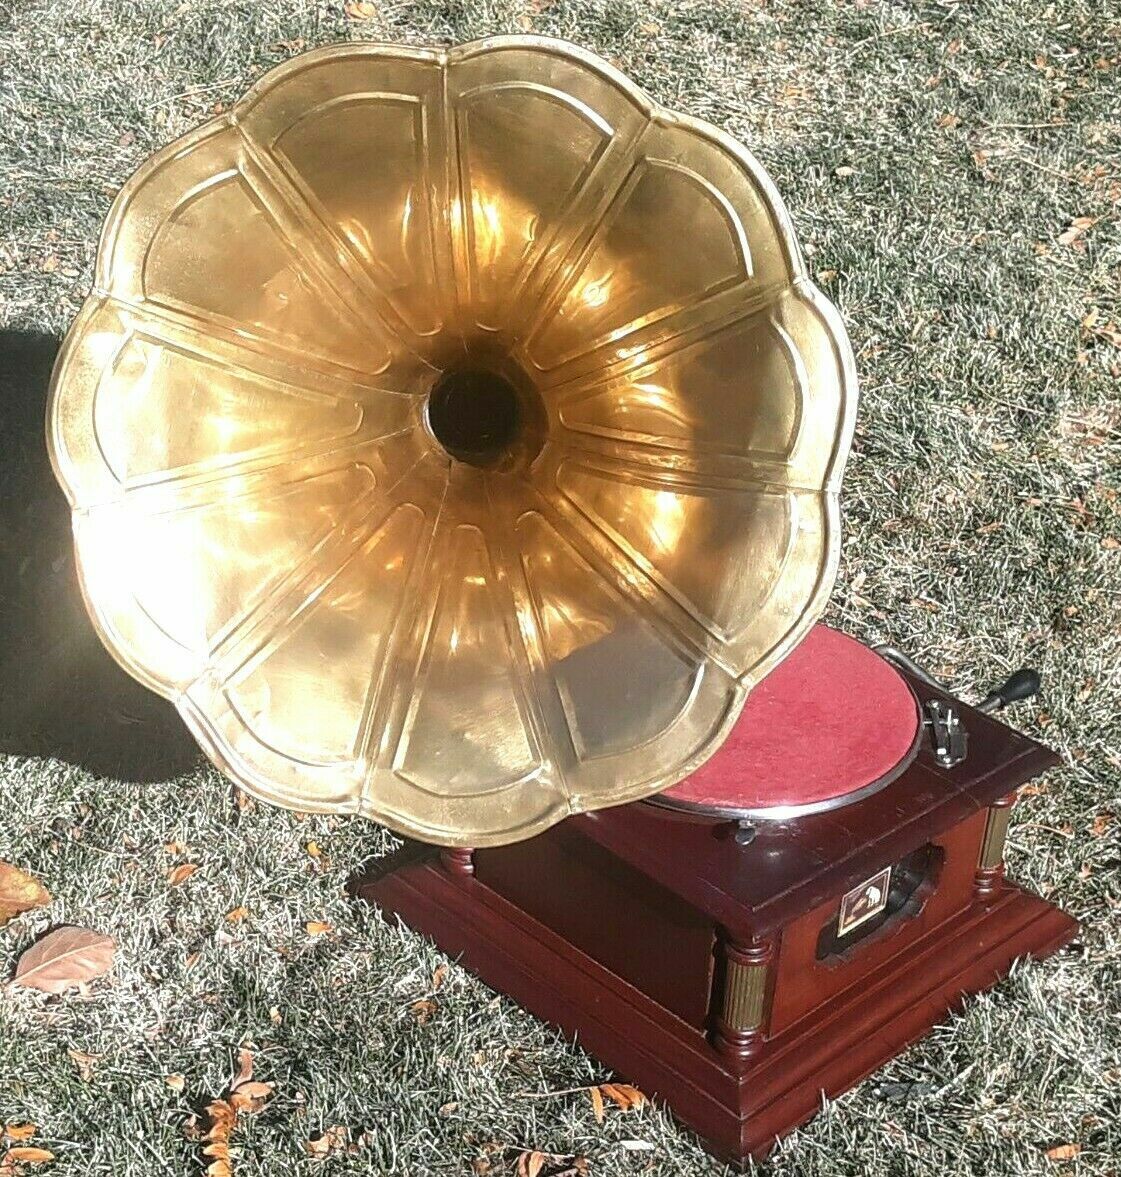 Replica Masters Voice Gramophone Vintage Thorens Reproduction Excellent Working